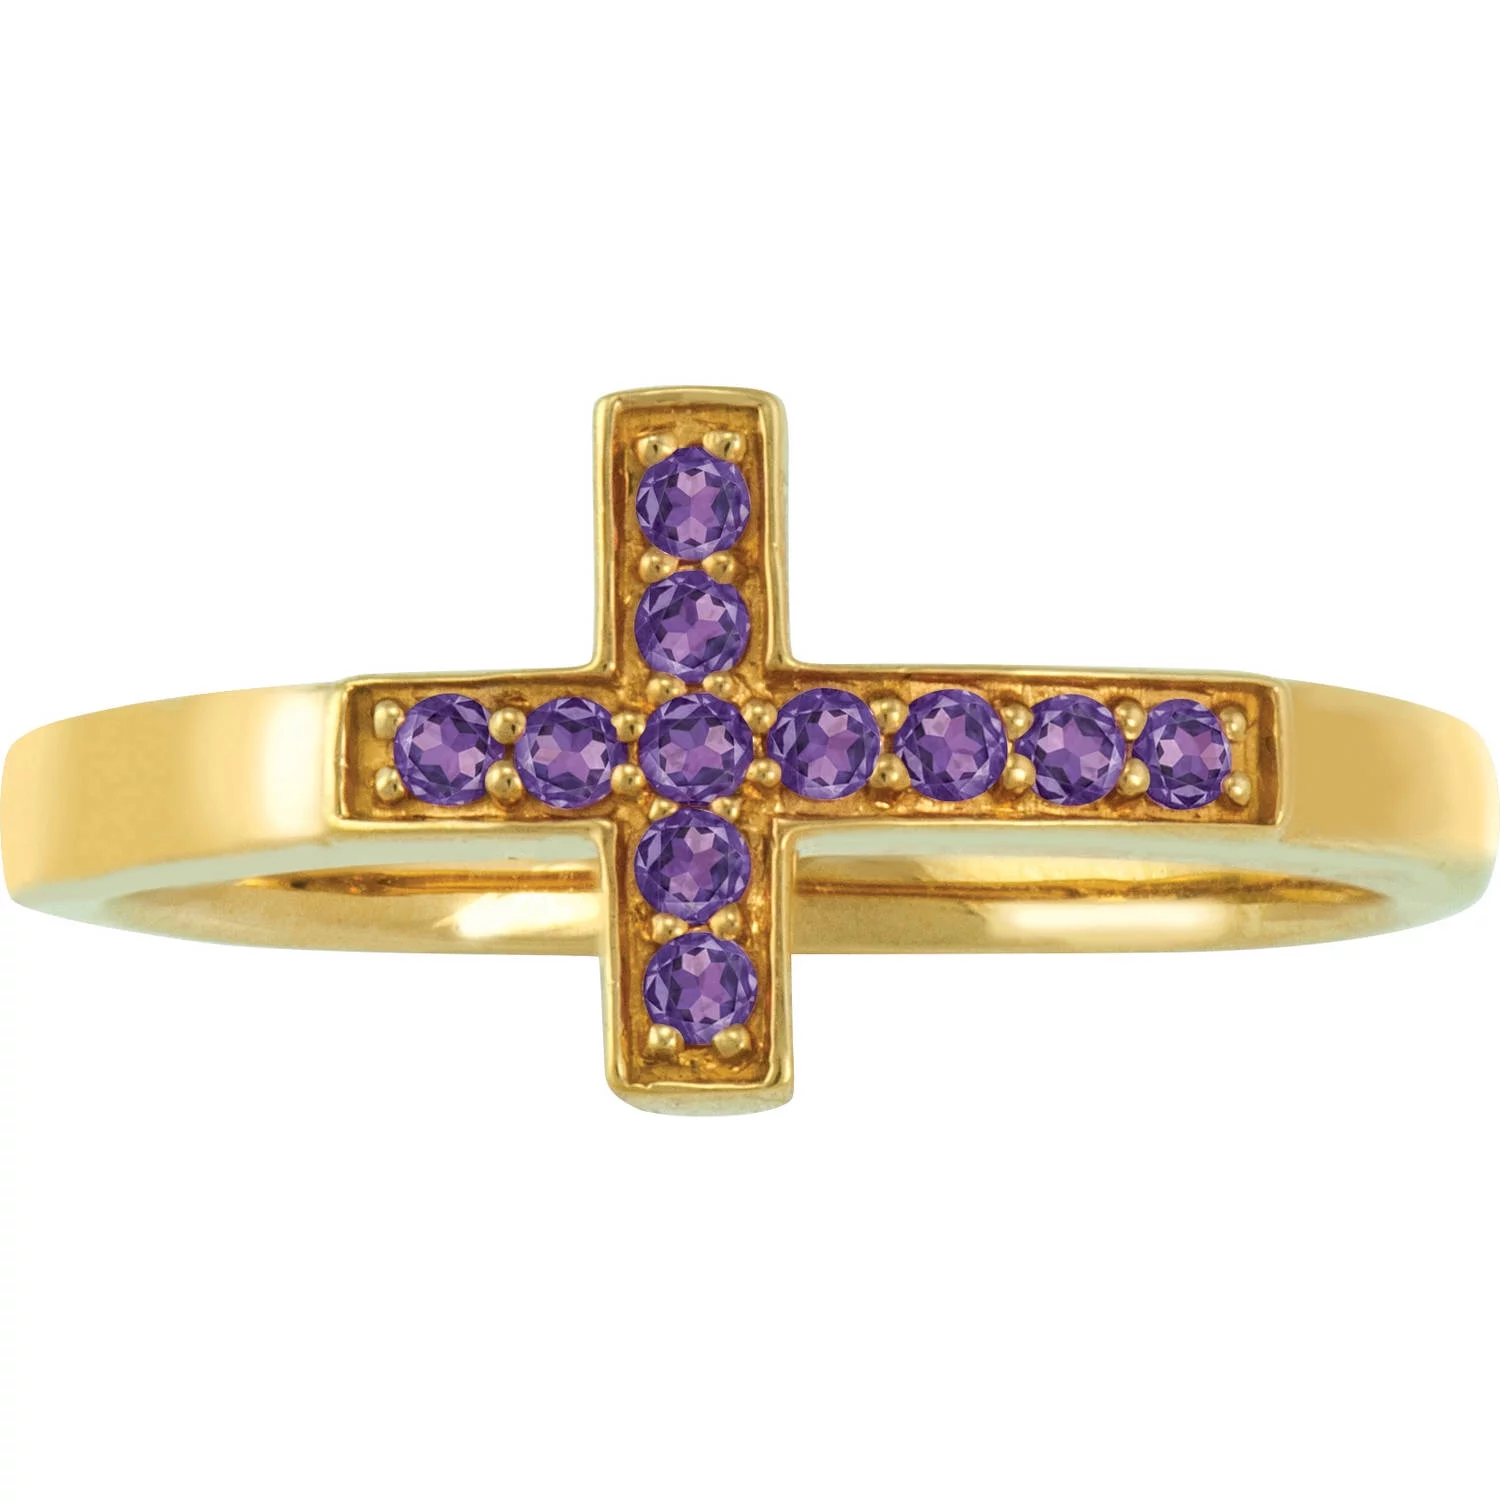 Personalized Family Jewelry Sideways Cross Ring available in Sterling Silver, Gold over Silver, Yellow and White Gold